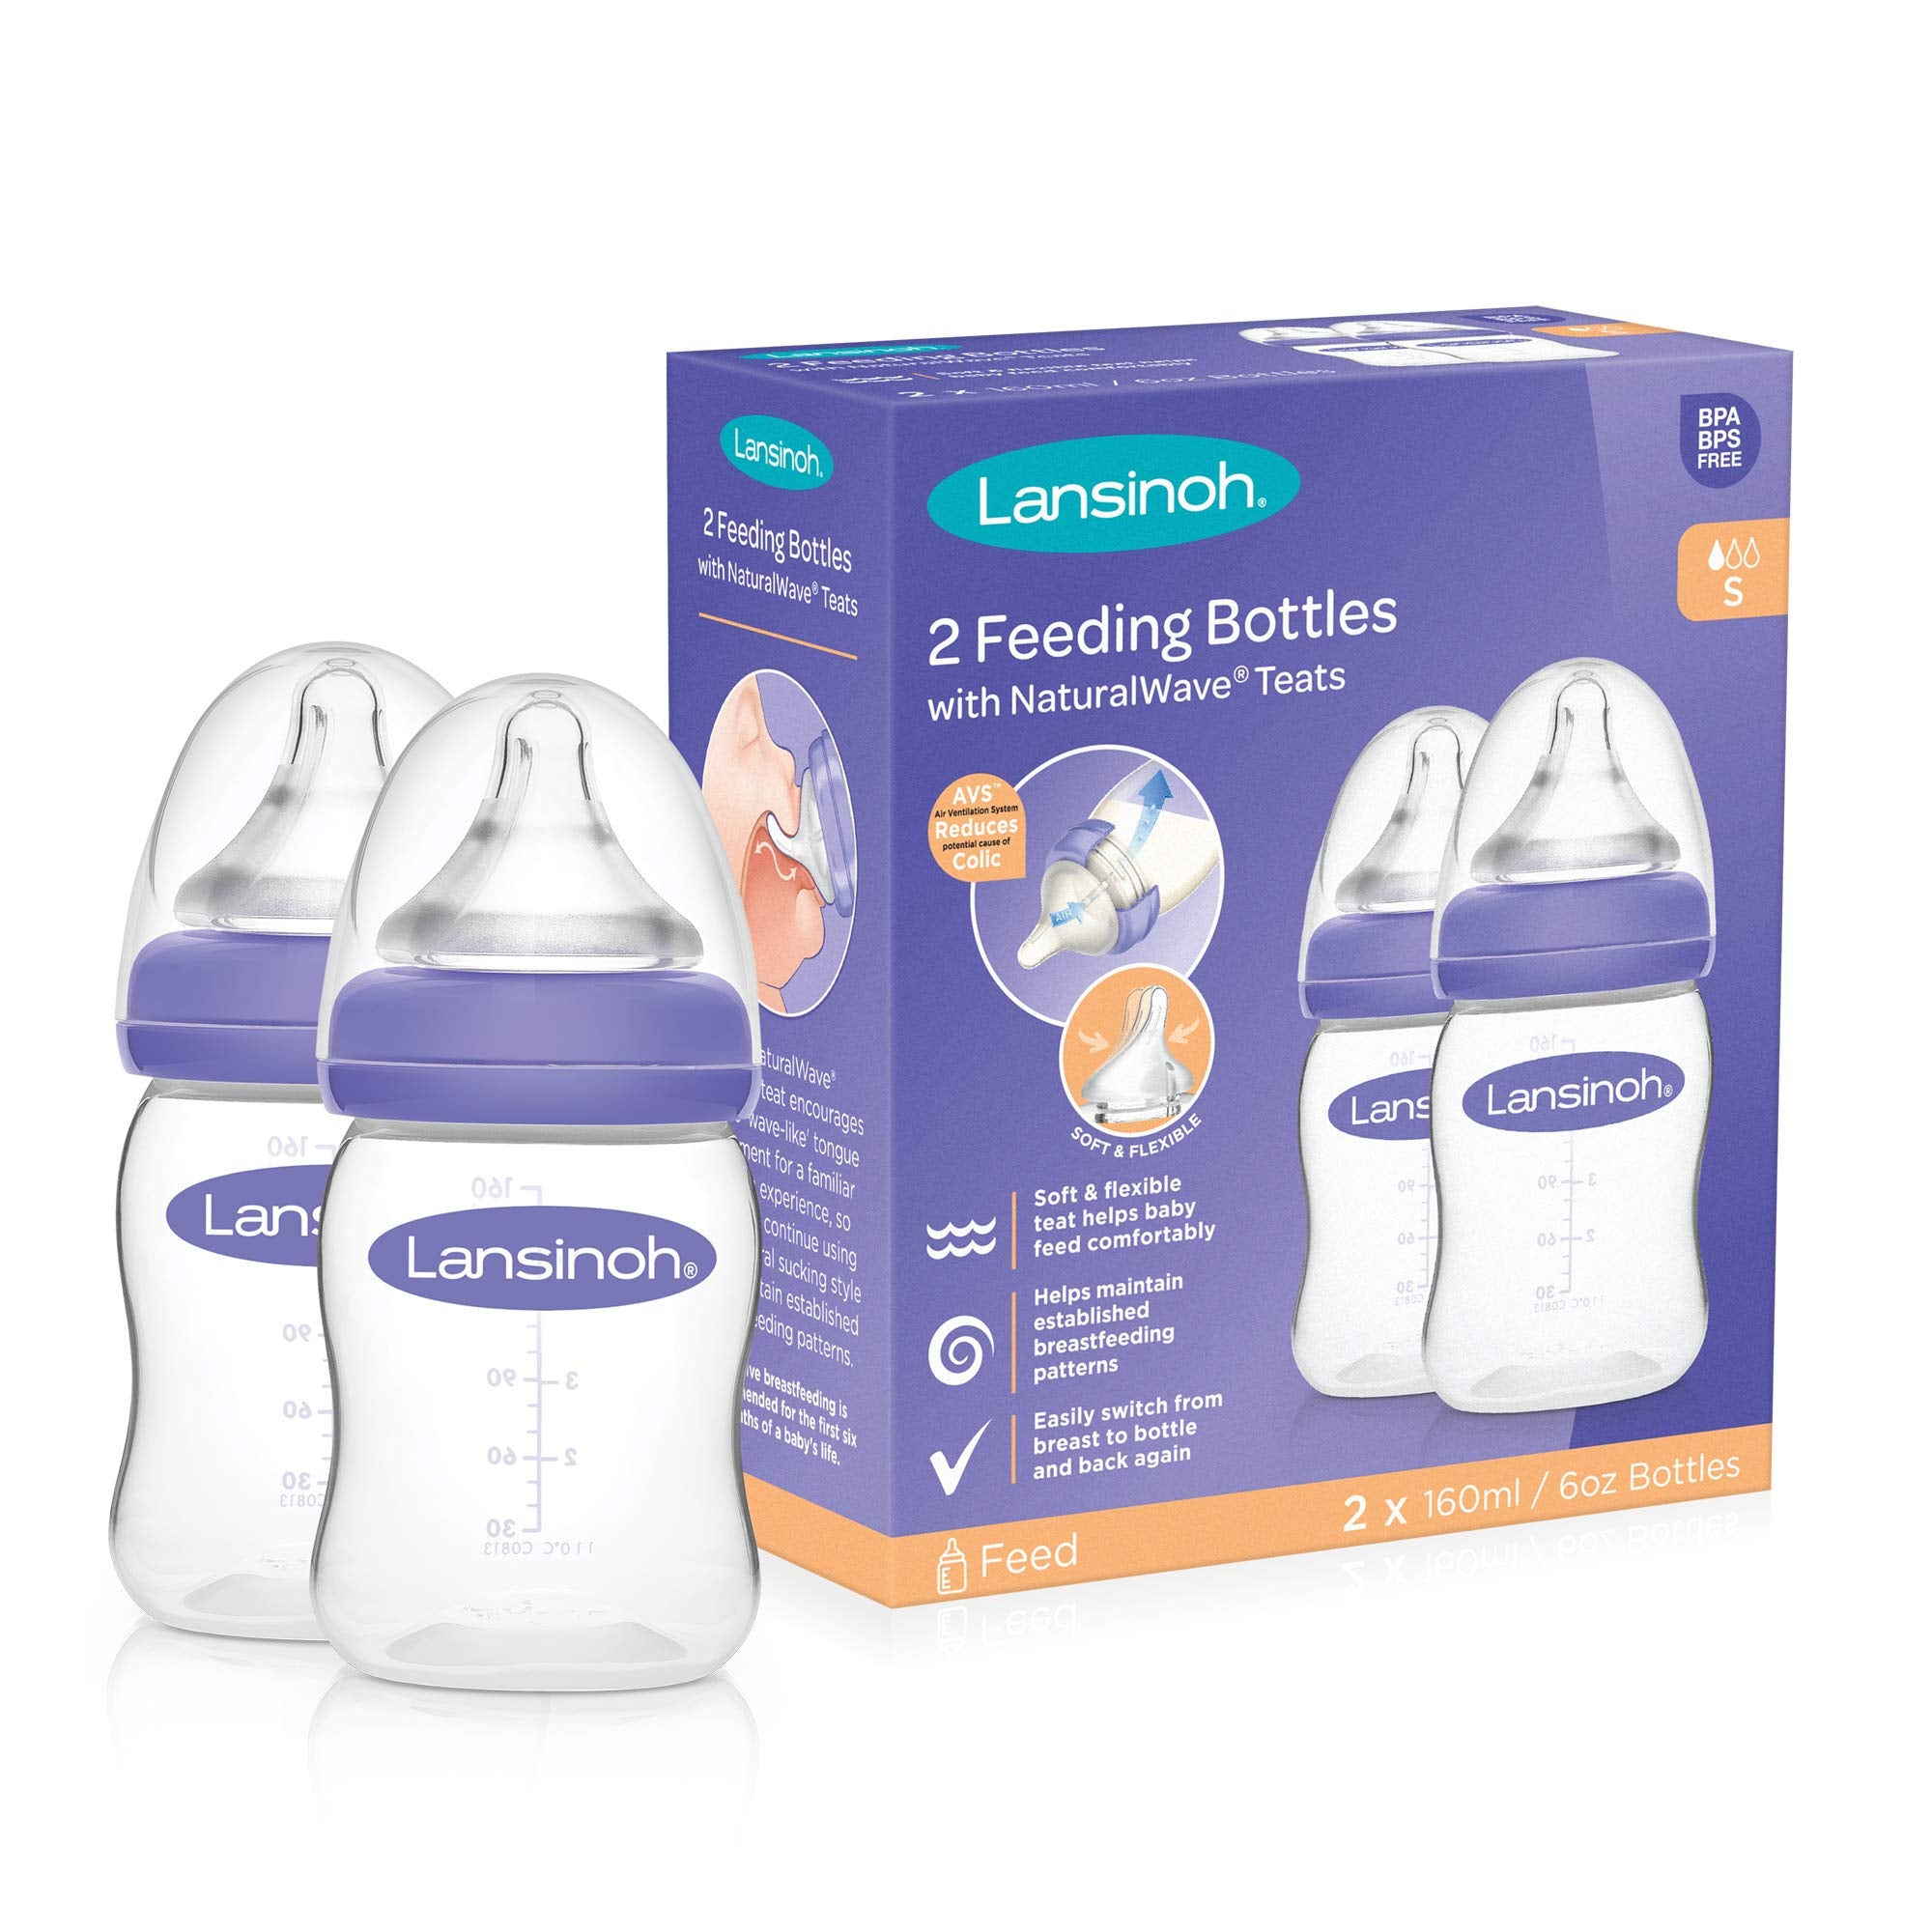 Lansinoh Momma Small Breast Feeding Bottle Set with NaturalWave Slow Flow Teat 2 x 160ml, 2 Count (Pack of 1)